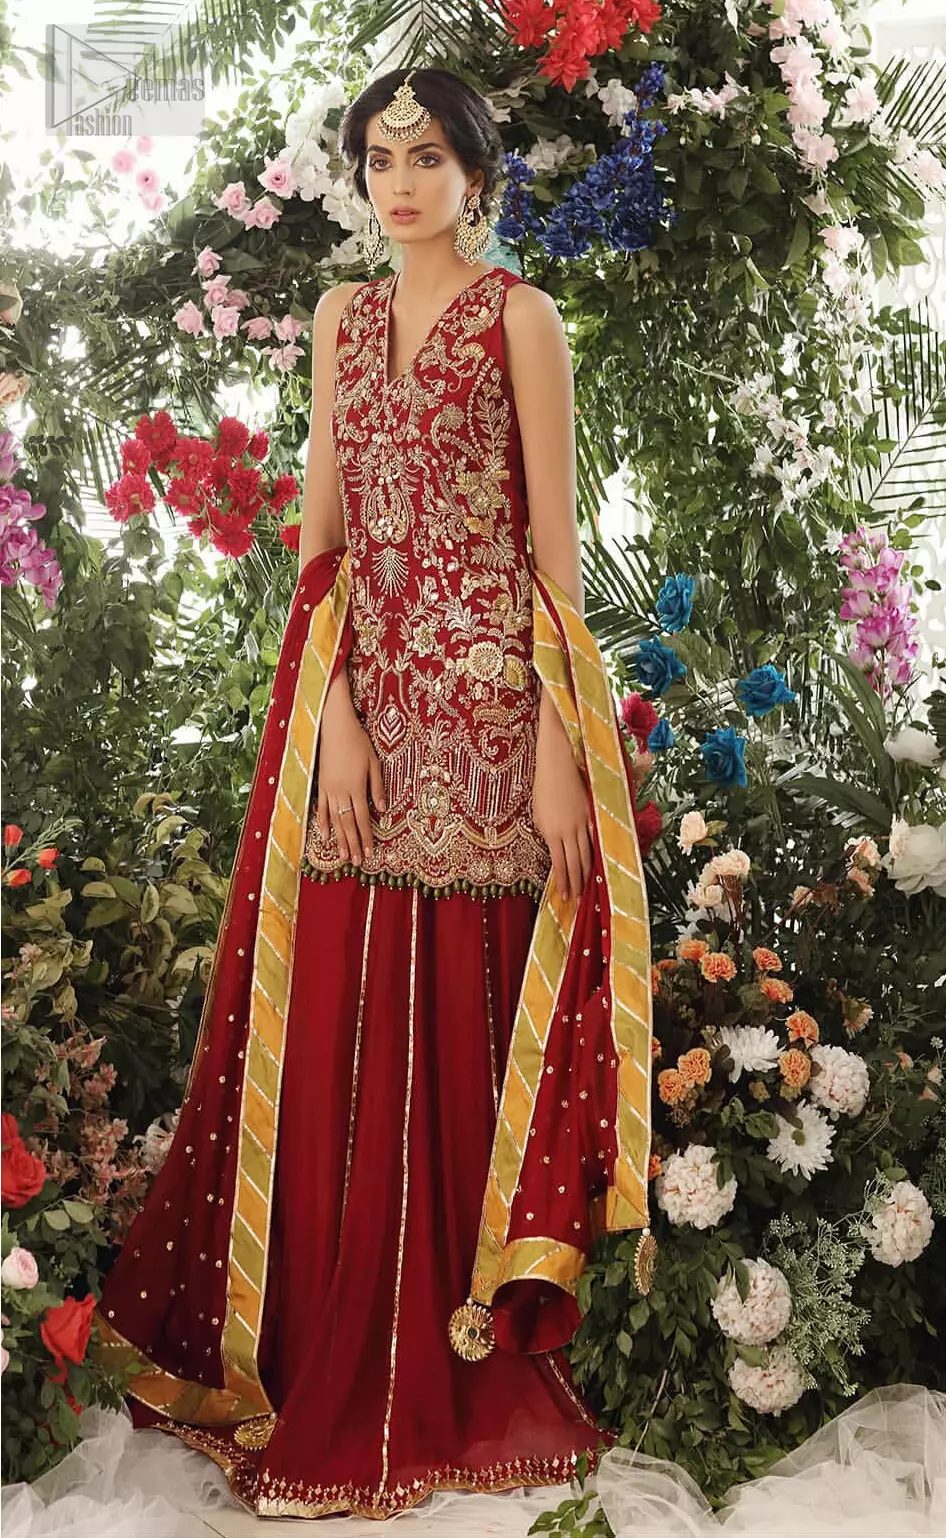 Tradition meets modernity. Boost your confidence and style in this glamorous attire accentuated with finest zardozi work embroidery and scalloped borders with dandling pearls. This maroon sleeveless shirt is ornamented with golden and light golden zardozi work. The scalloped hemline is decorated with dangling pearls. Style it confidently with maroon sharara adorned with beautiful gota work. It is paired with an ethereal maroon dupatta with scattered sequins all over and four sided applique borders.